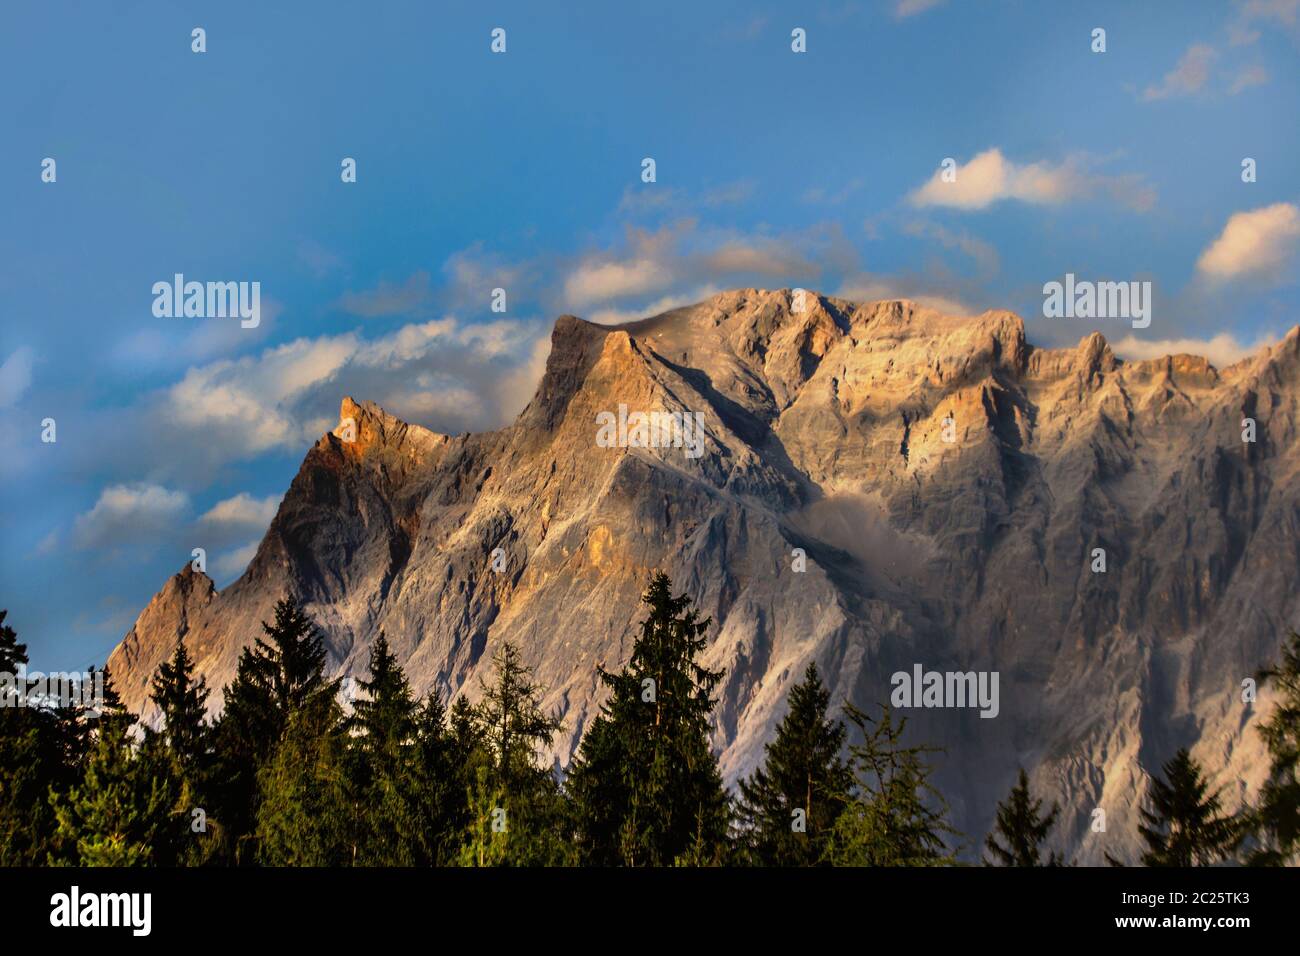 Zugspitz massif photographed from Tyrolean side. Stock Photo